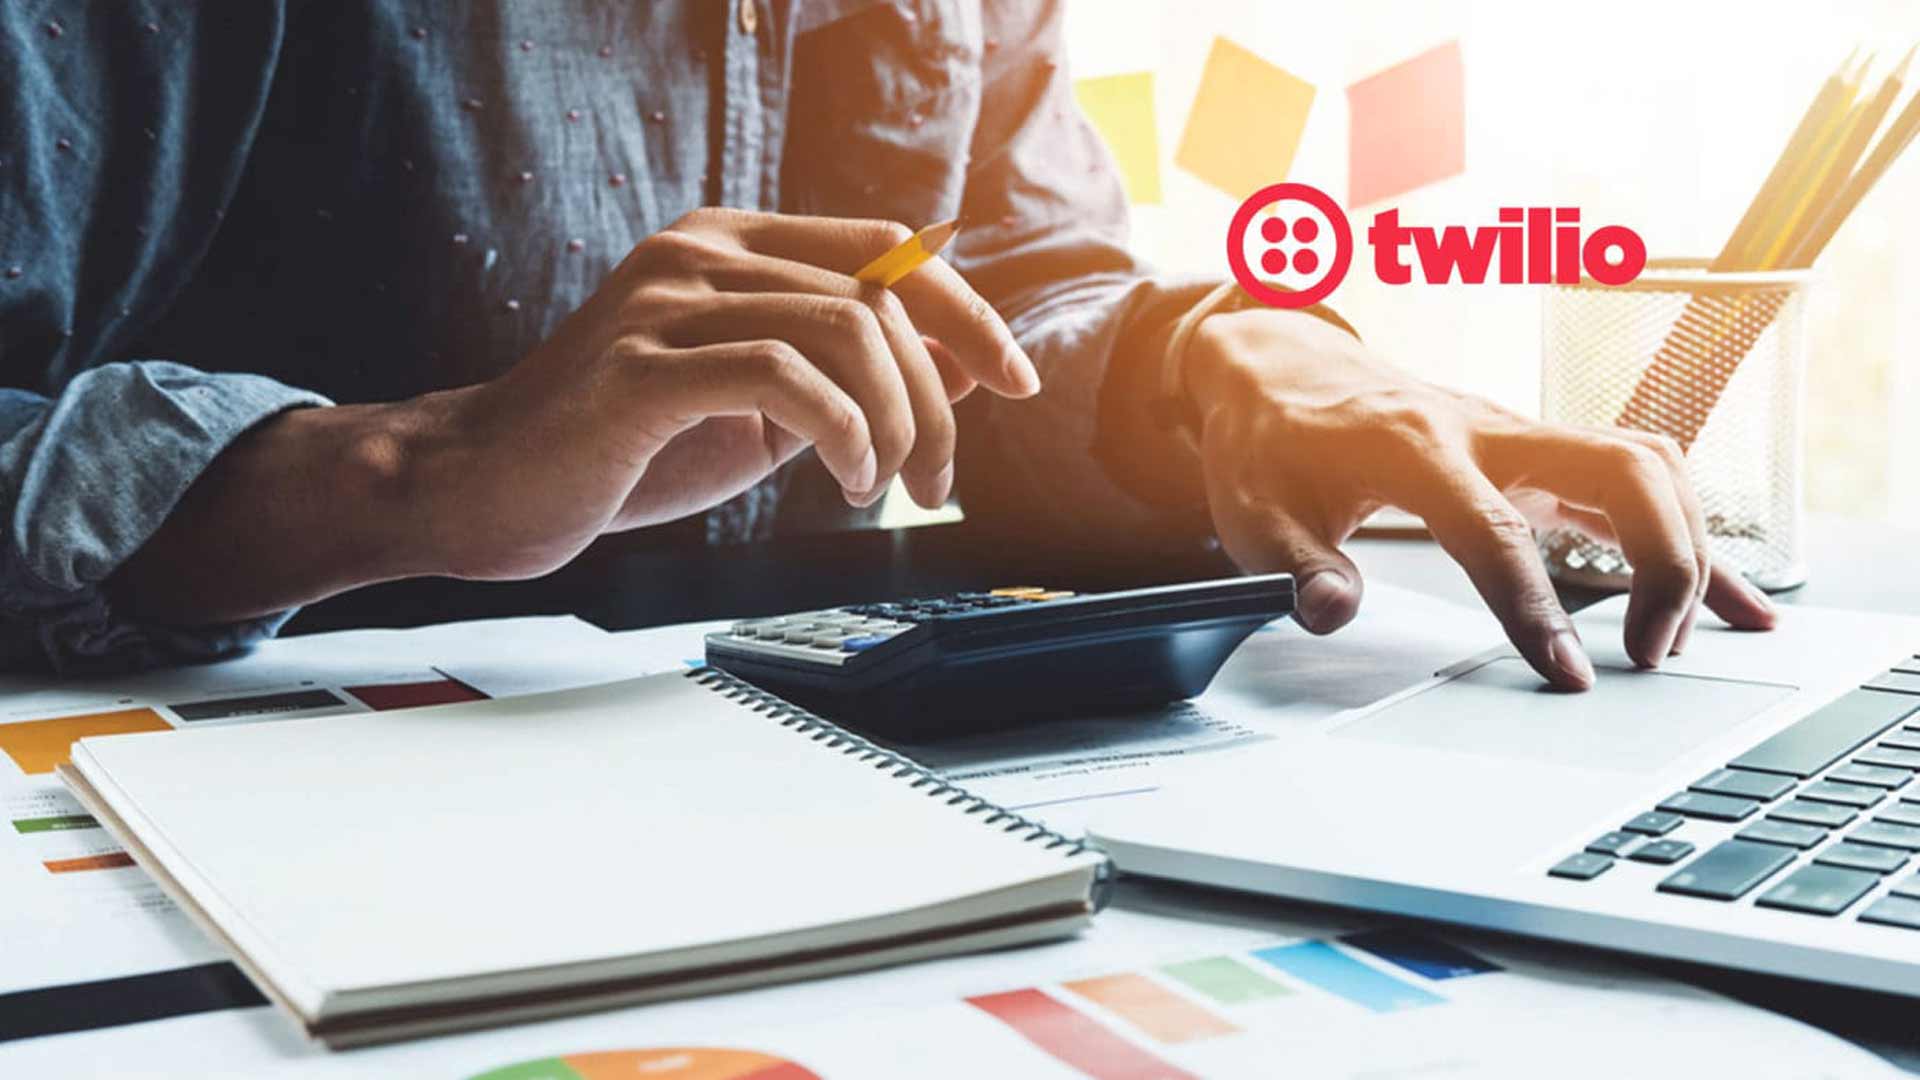 Twilio Expands Its International Presence With Offices in Paris